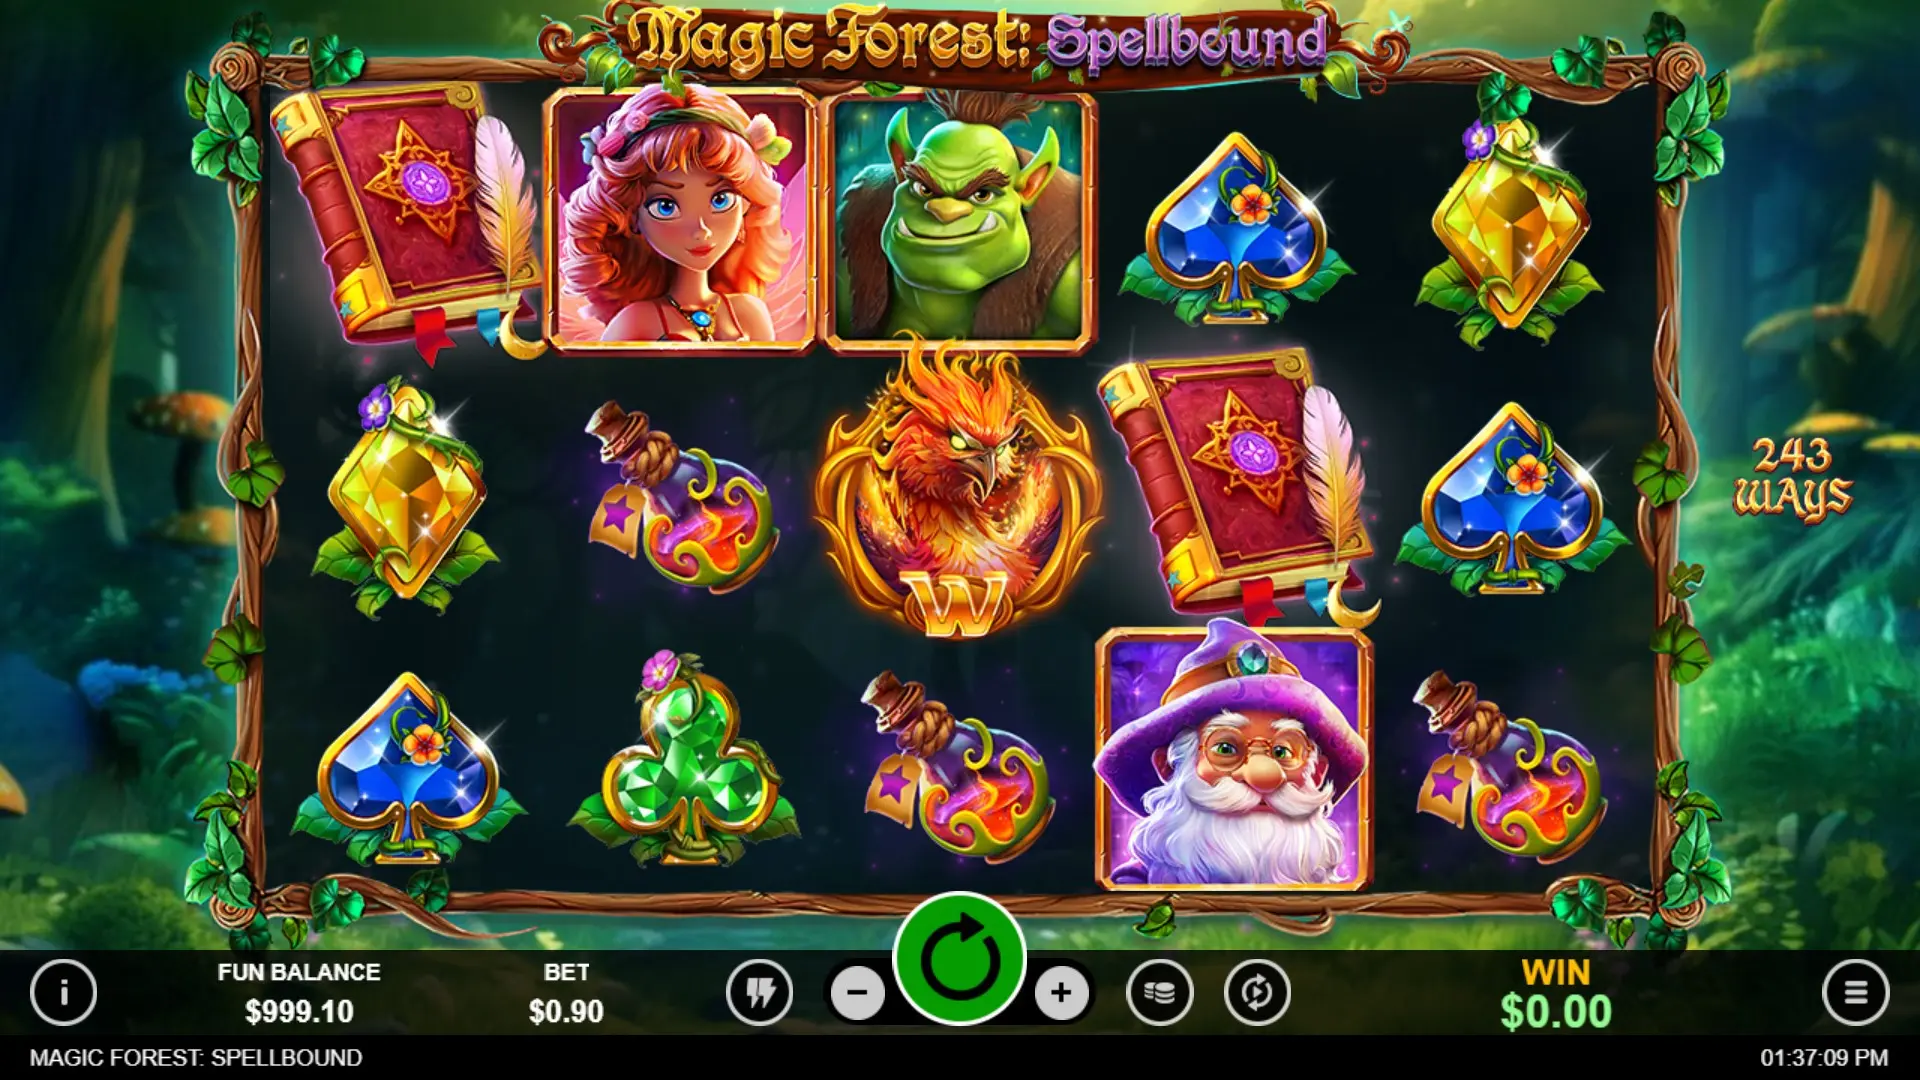 25 Free Spins on Magic Forest Spellbound at Fair Go Casino